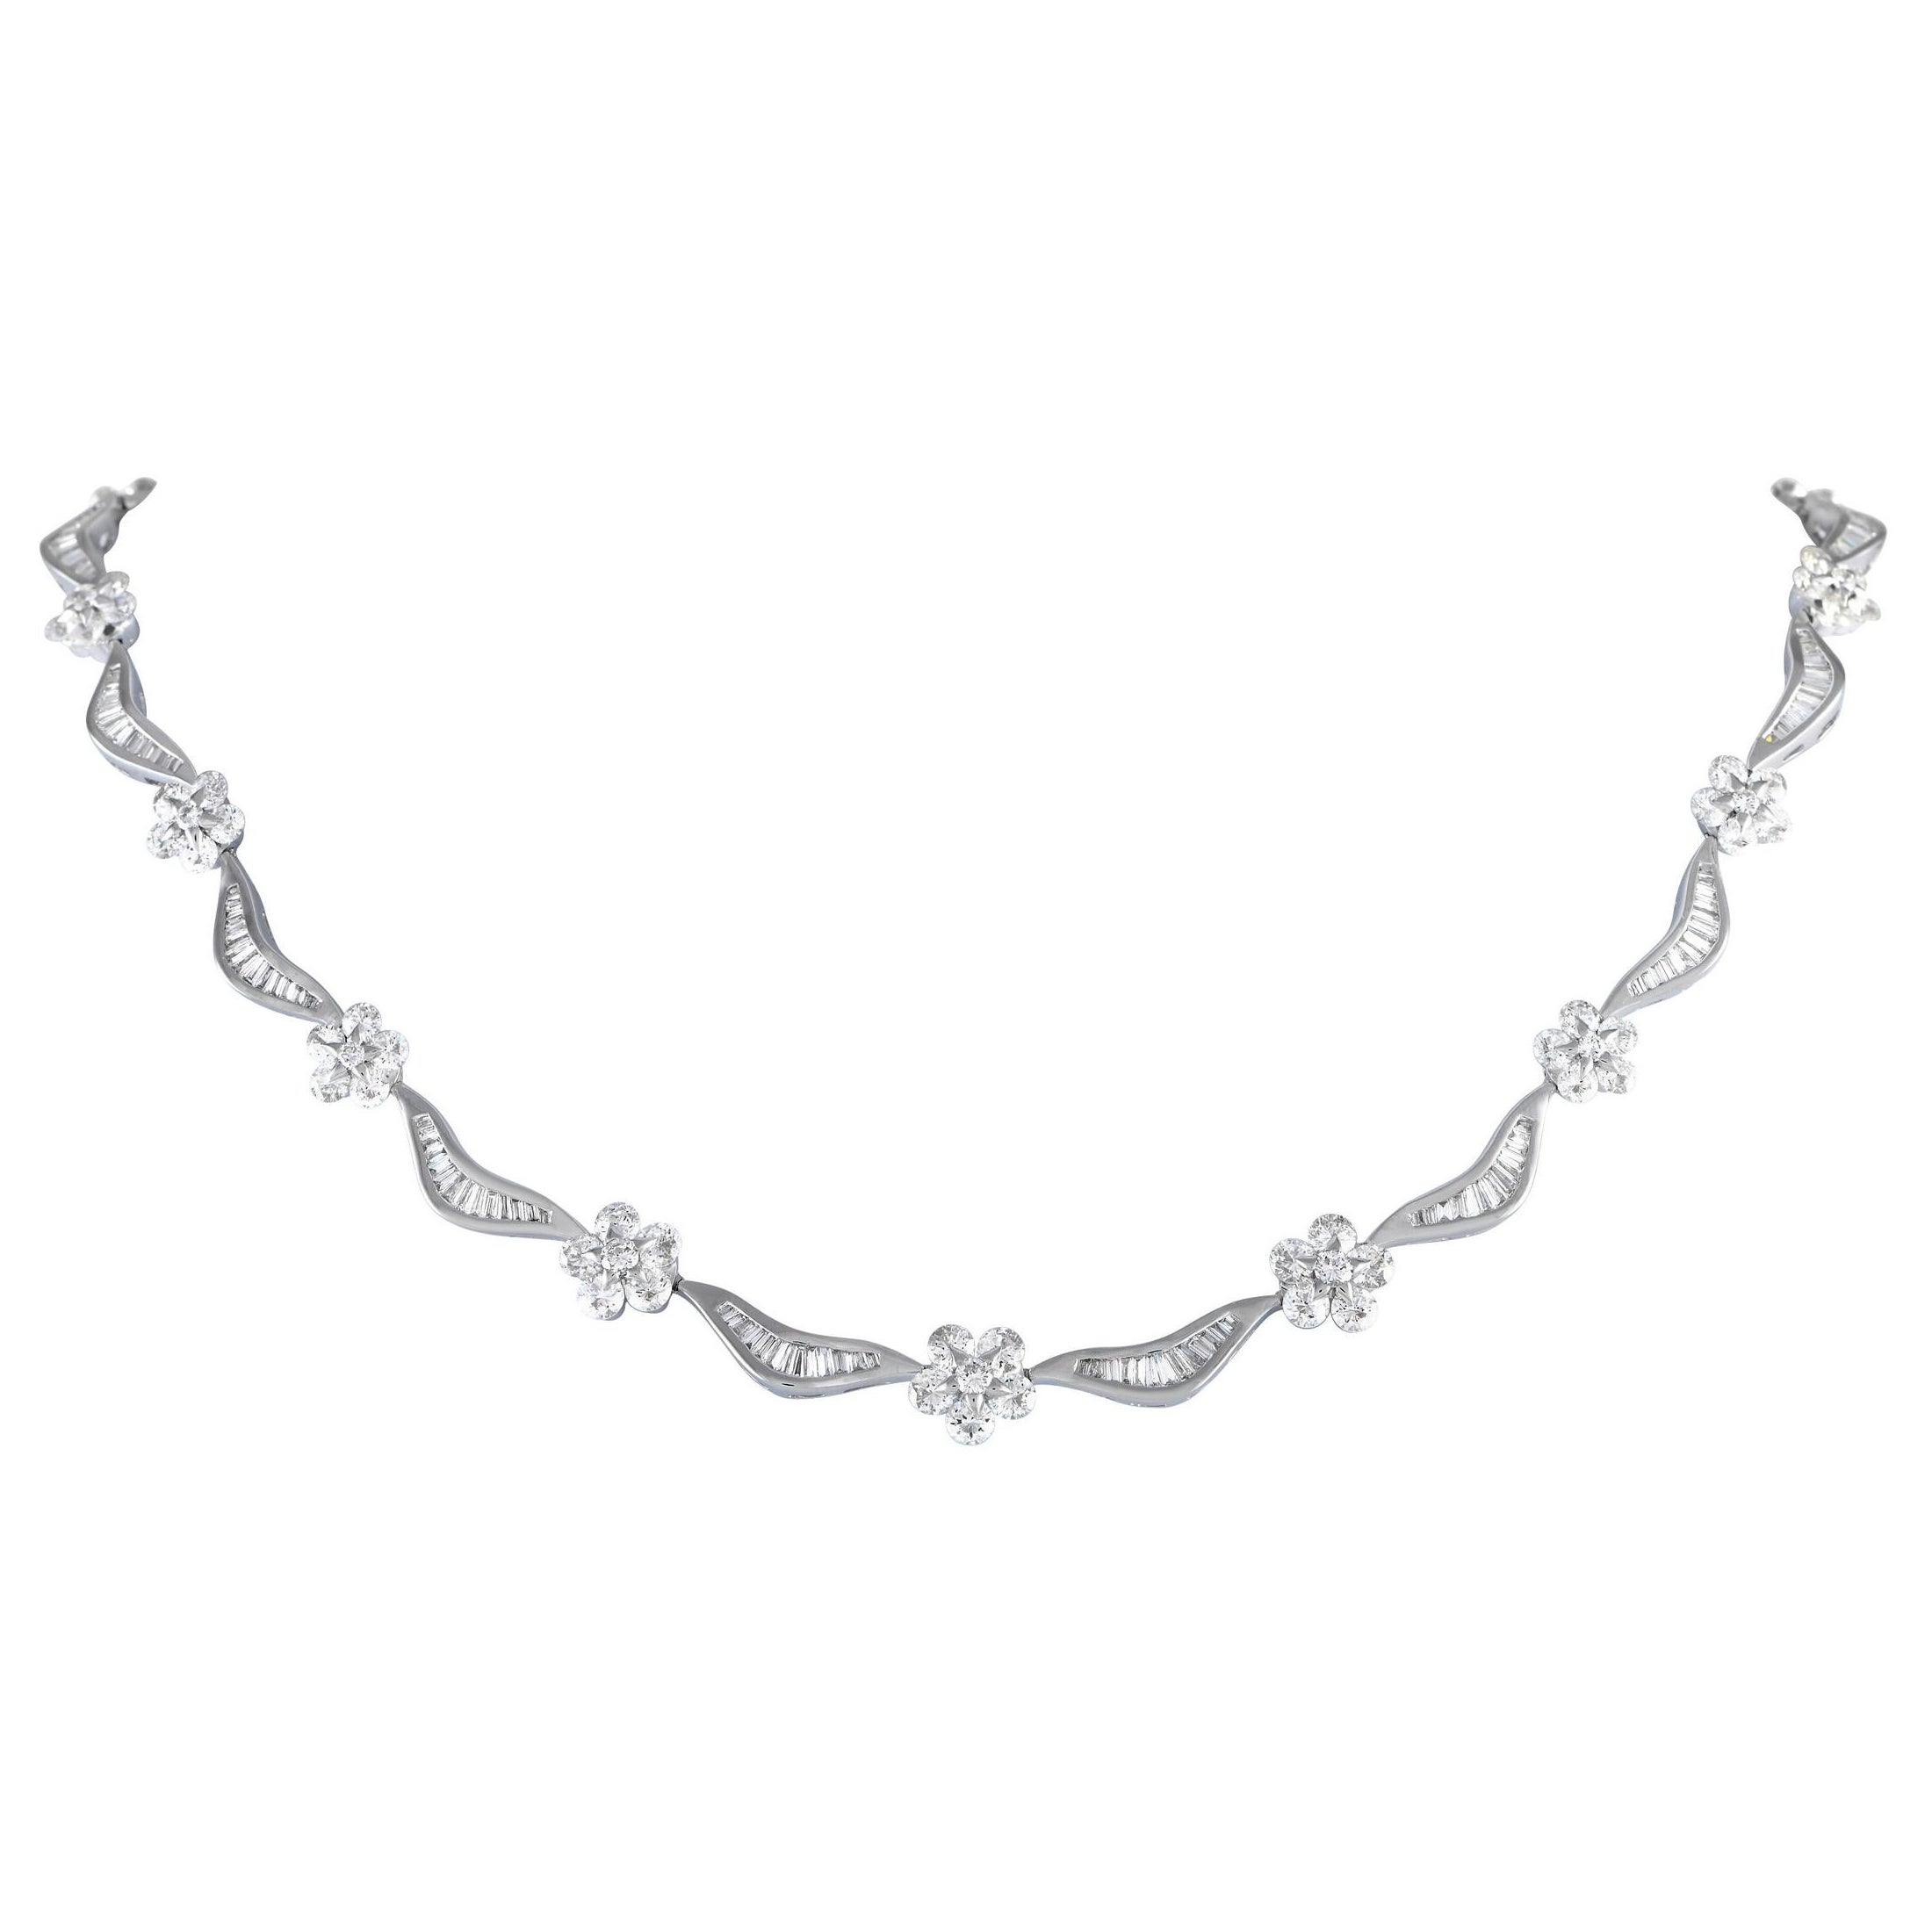 LB Exclusive 18K White Gold 18.80ct Diamond Necklace NK01081 For Sale